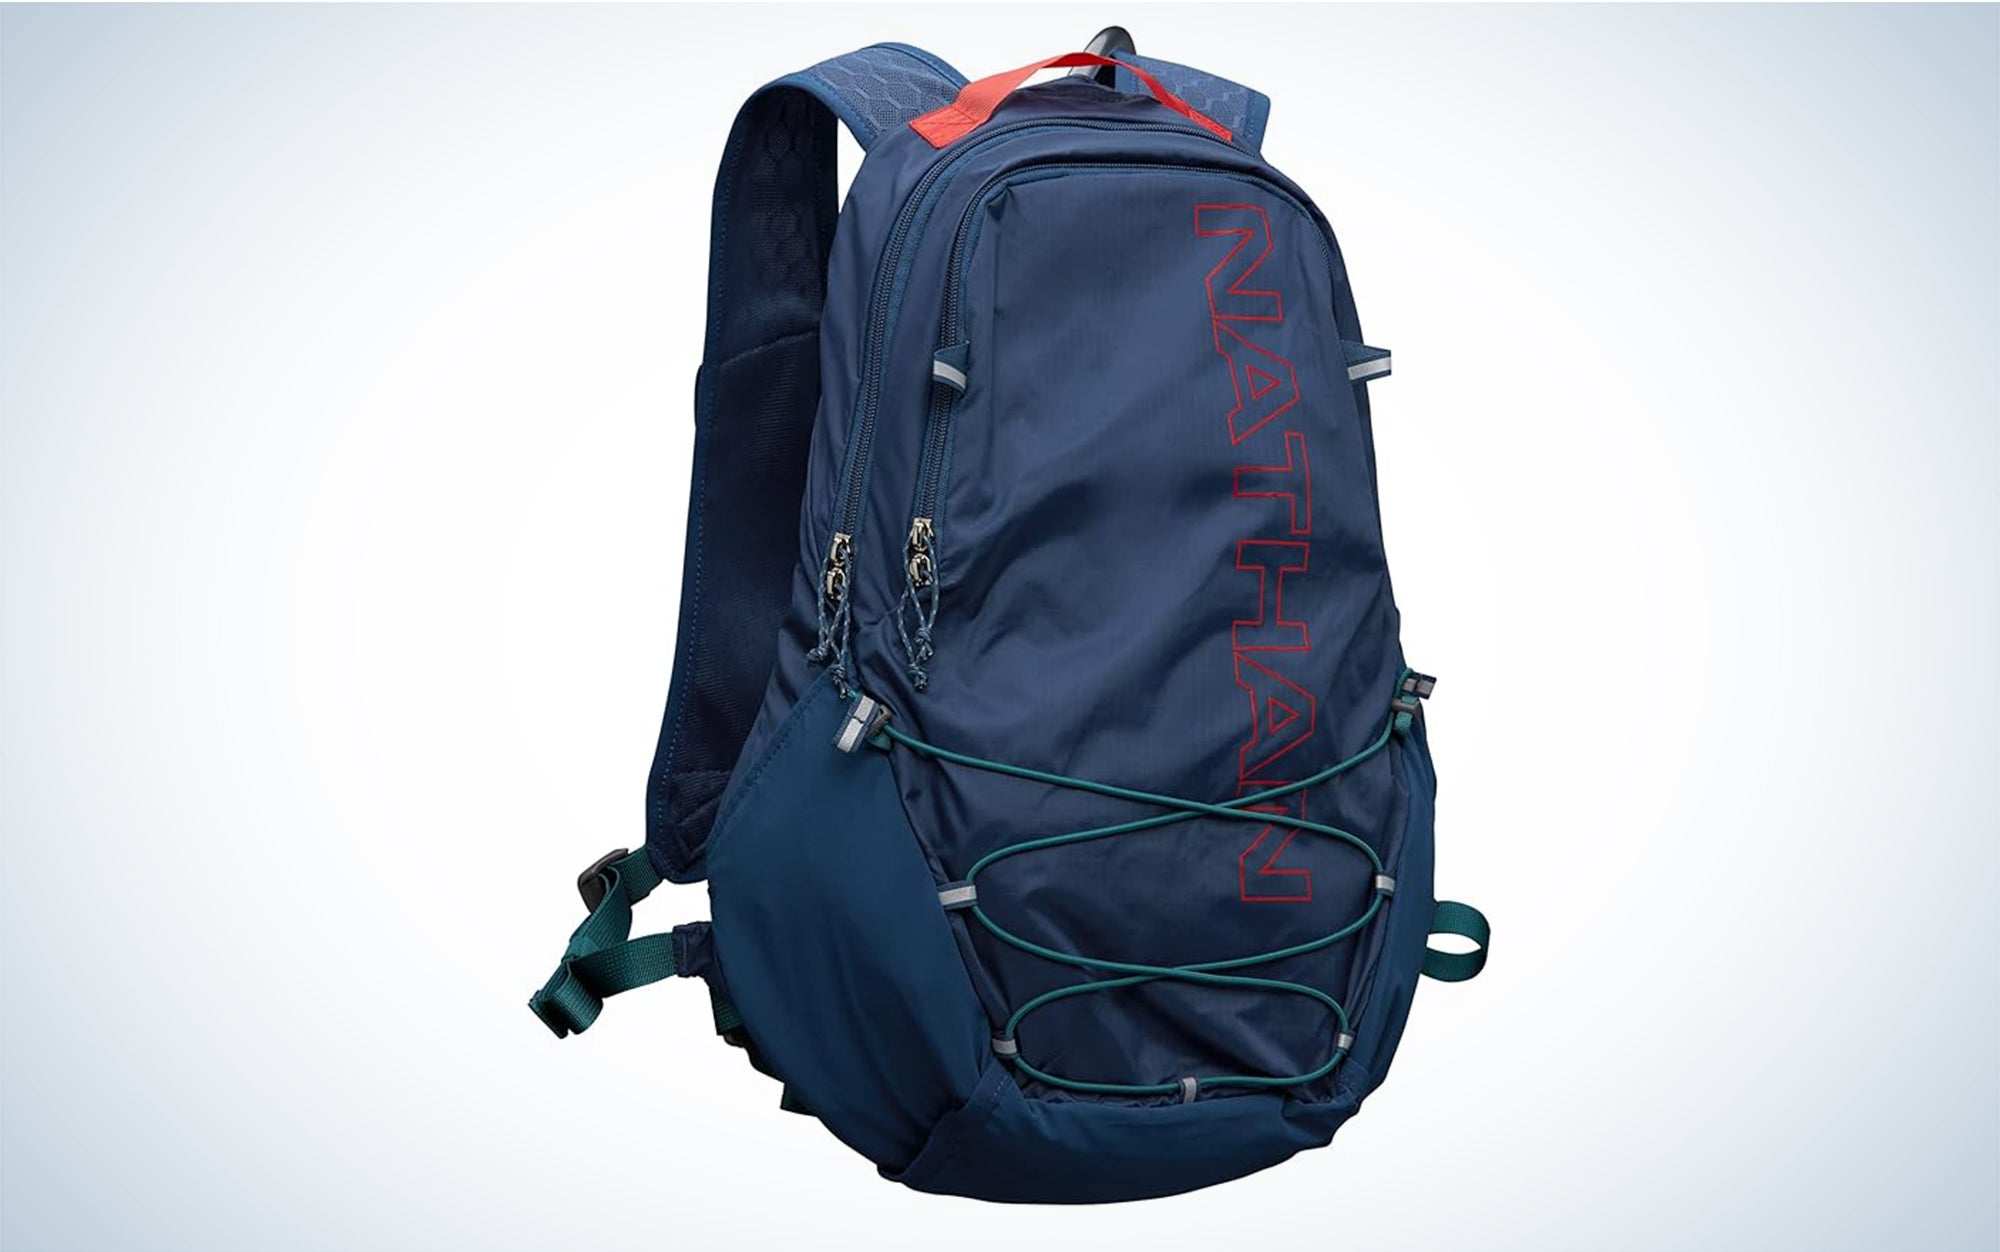 We tested the Nathan Crossover 15L Hydration Pack.